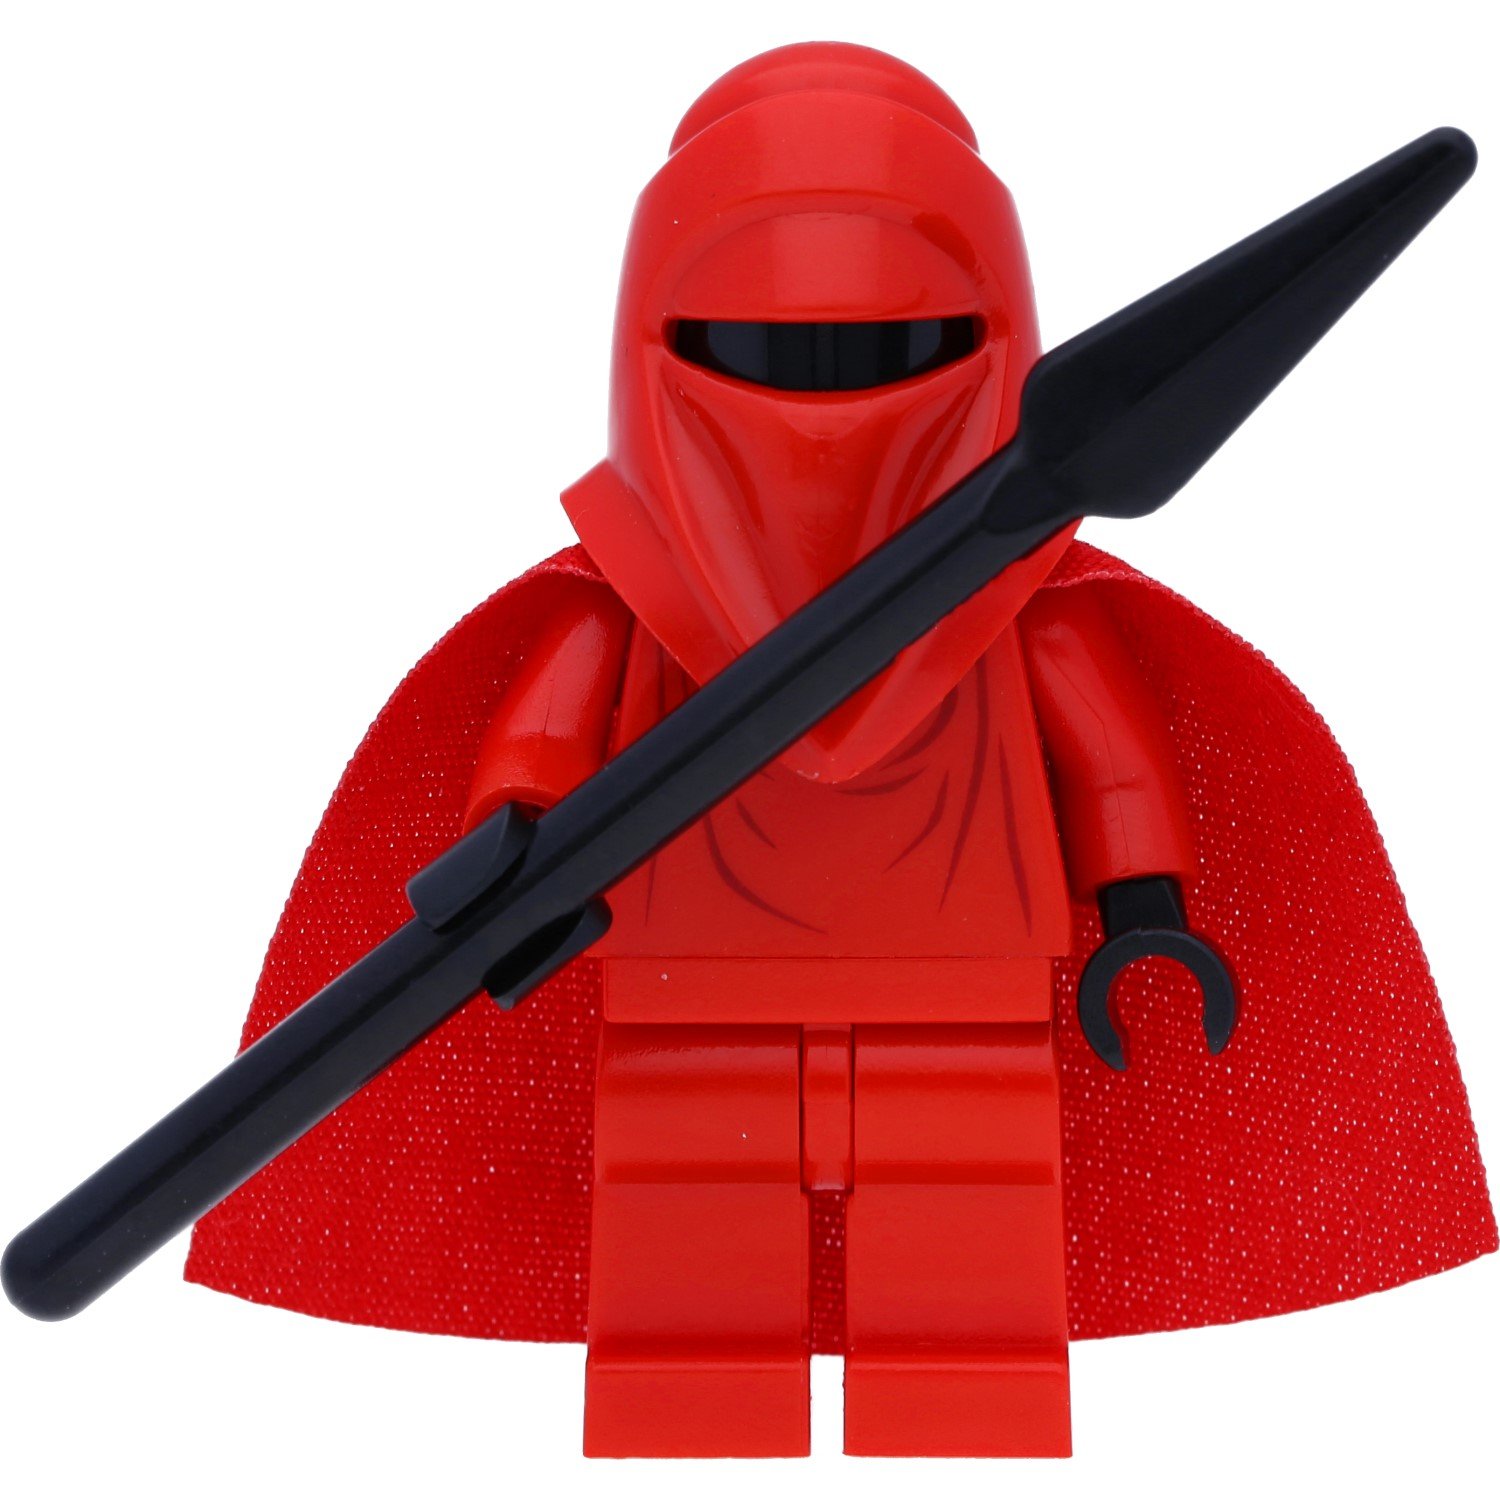 Lego Star Wars Imperial Royal Guard Minifigure With Black Spear